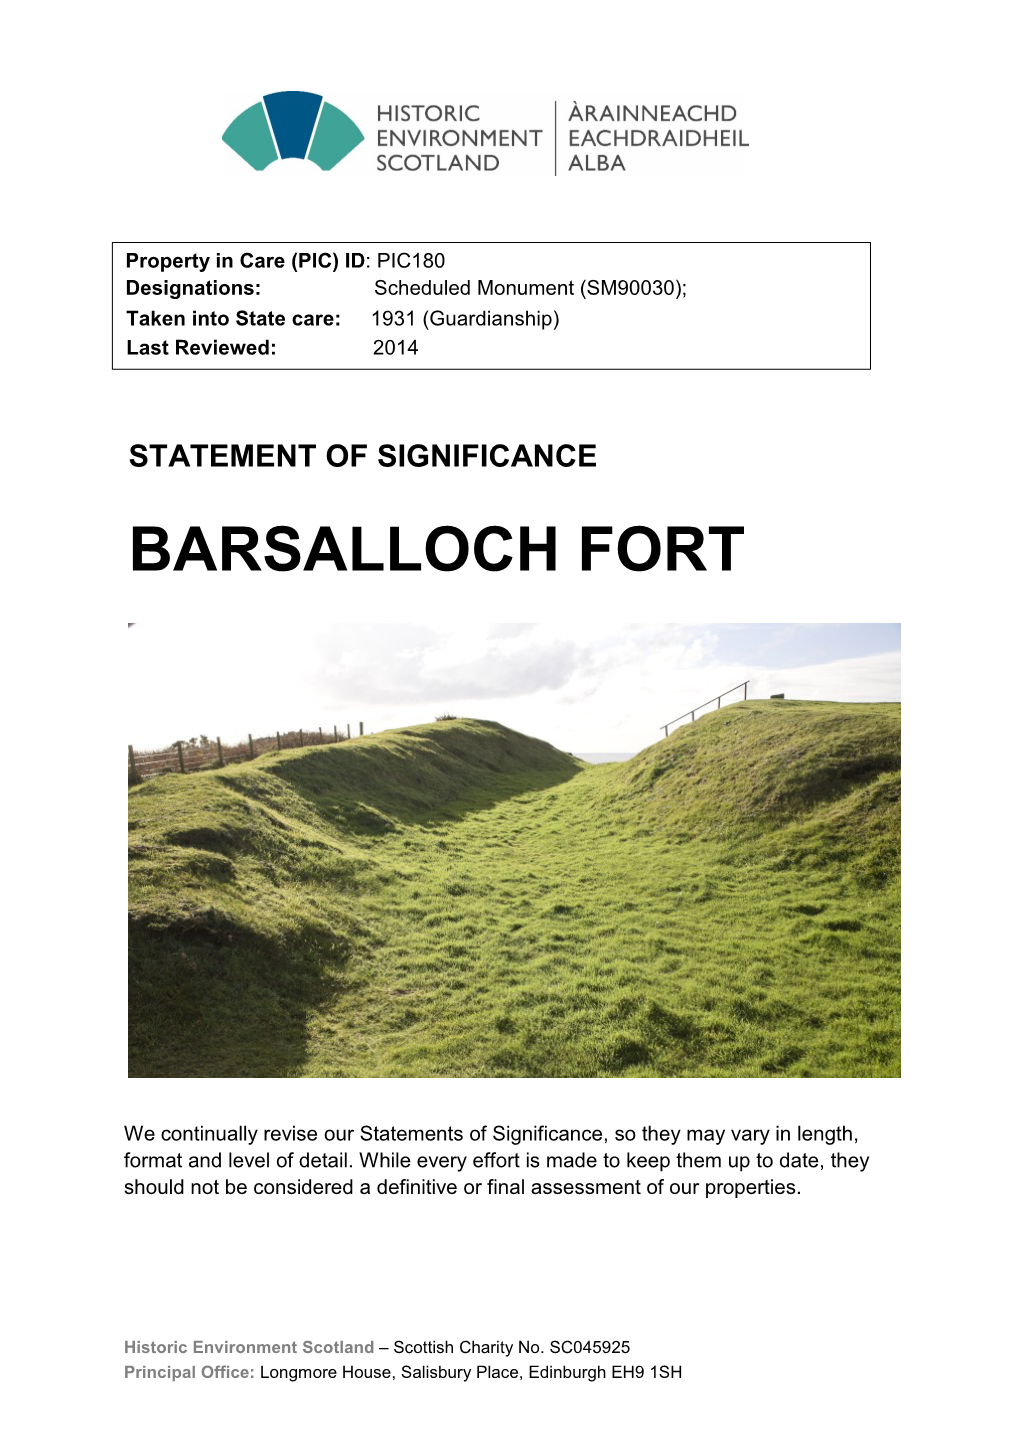 Barsalloch Fort Statement of Significance